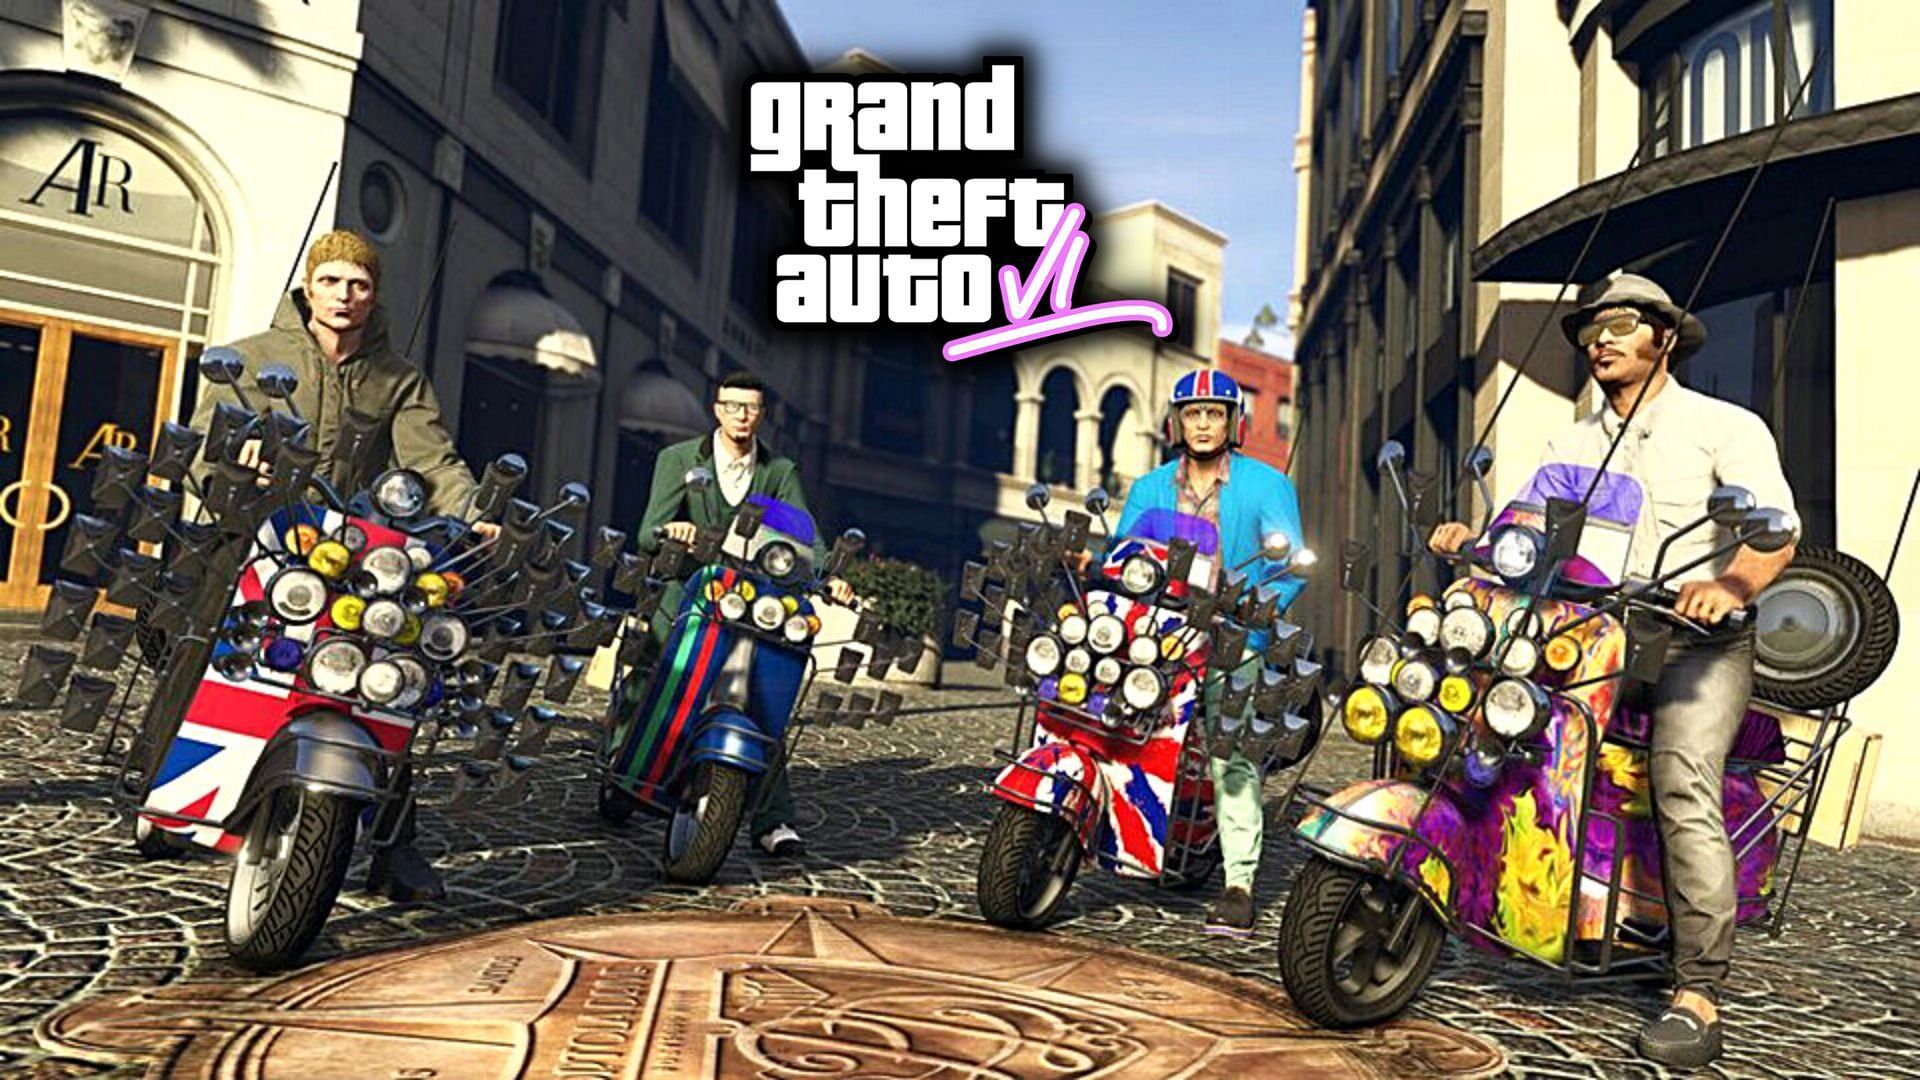 A picture of Faggio mod, a variant of the standard Faggio scooter, that could also appear in GTA 6 (Image via GTA Magazine)